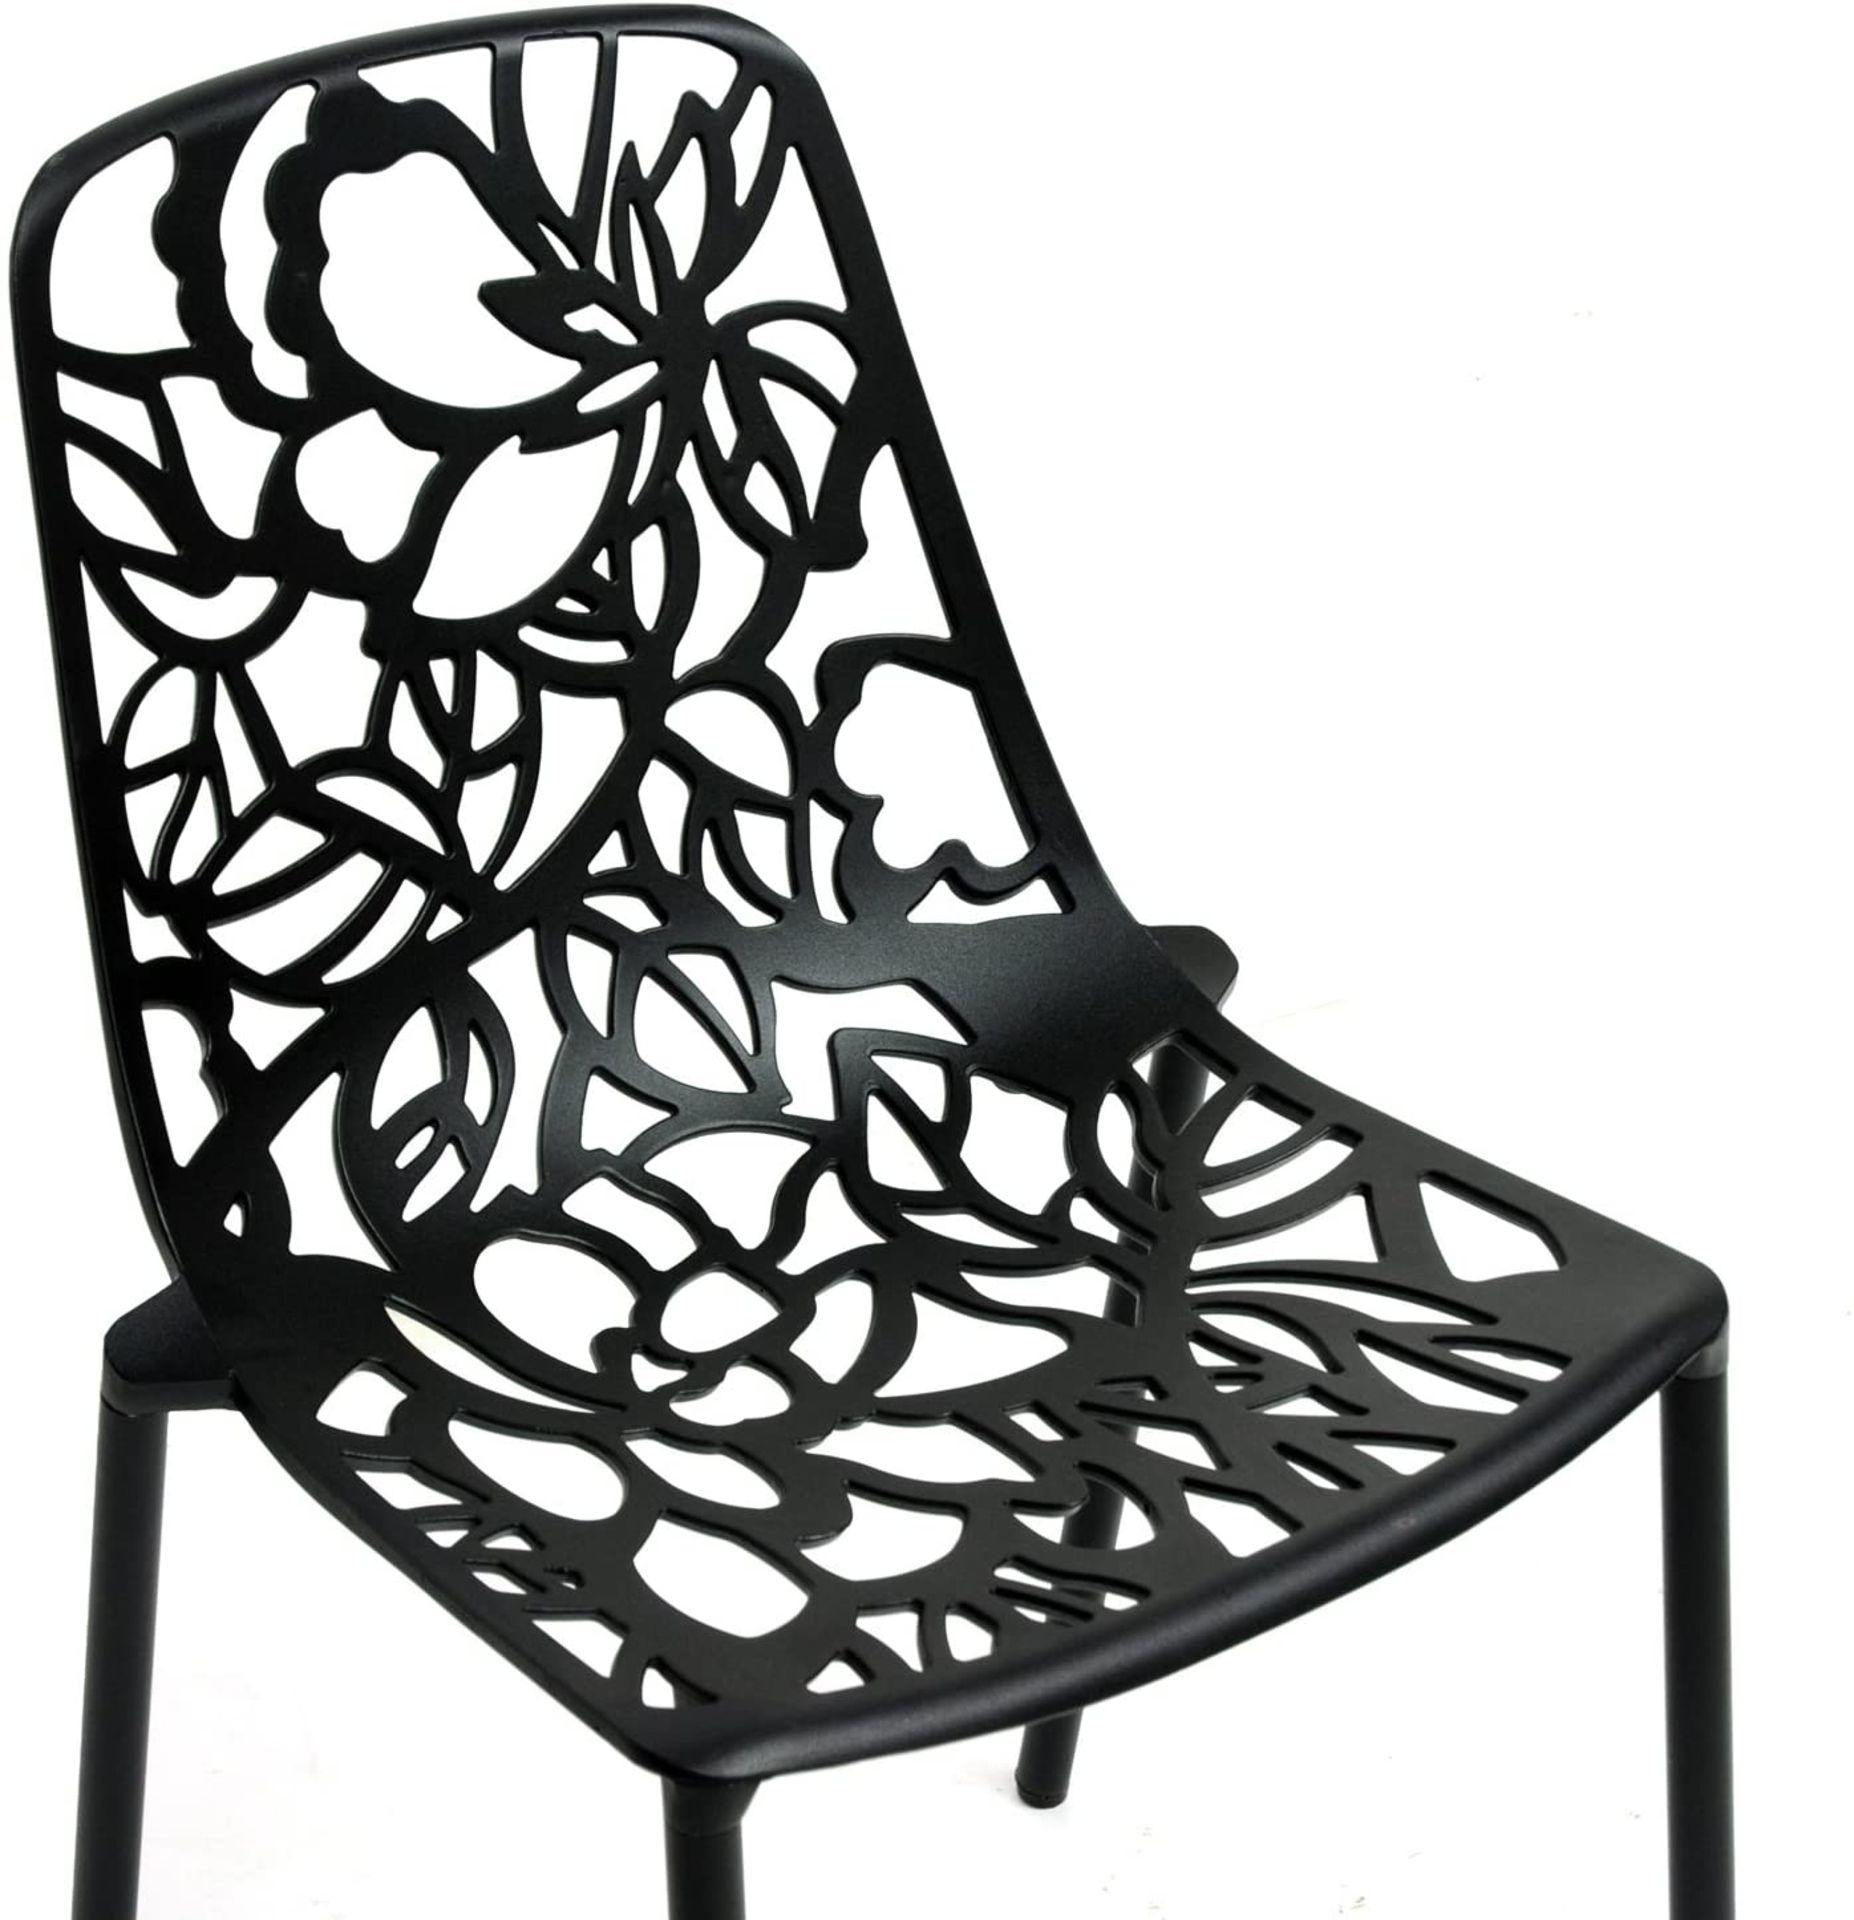 4 x Metal Modern Designer Dining Chairs With A Floral Filigree Design - Brand New Boxed Stock - Image 2 of 4